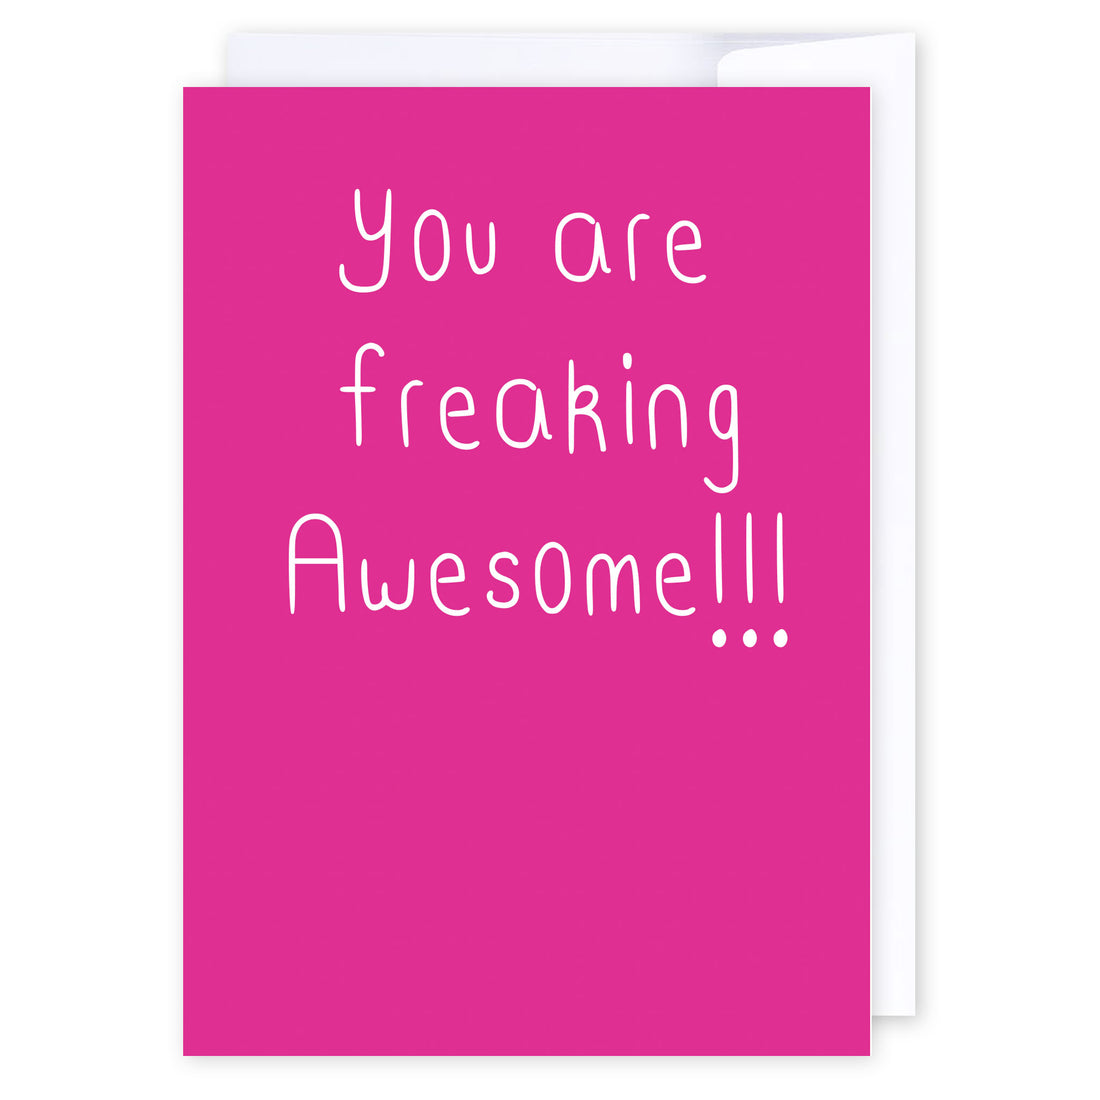 You are freaking awesome!